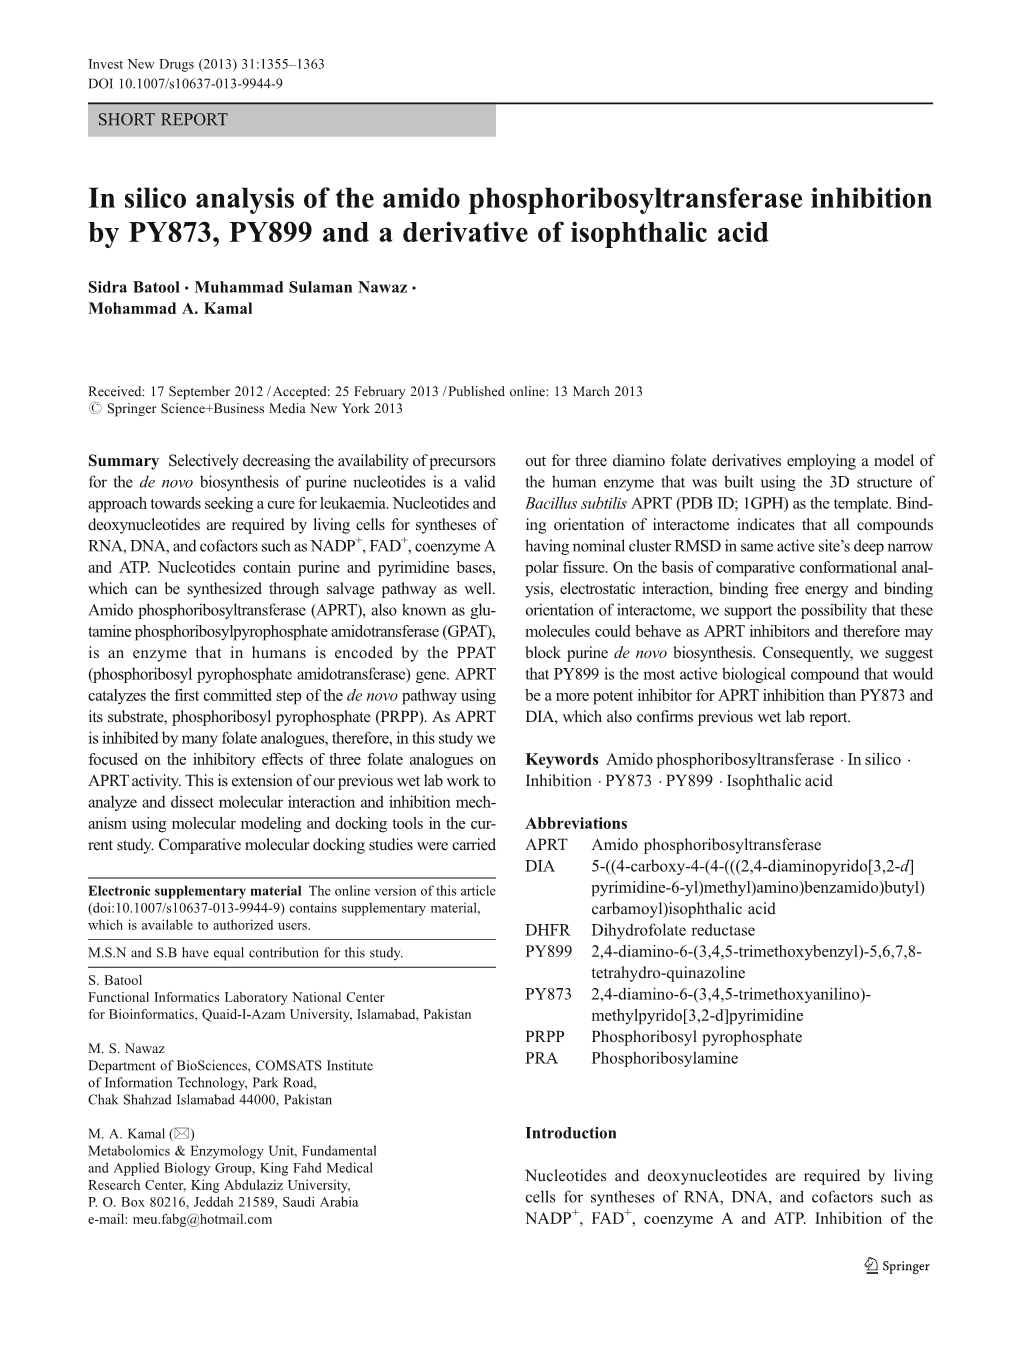 In Silico Analysis of the Amido Phosphoribosyltransferase Inhibition by PY873, PY899 and a Derivative of Isophthalic Acid